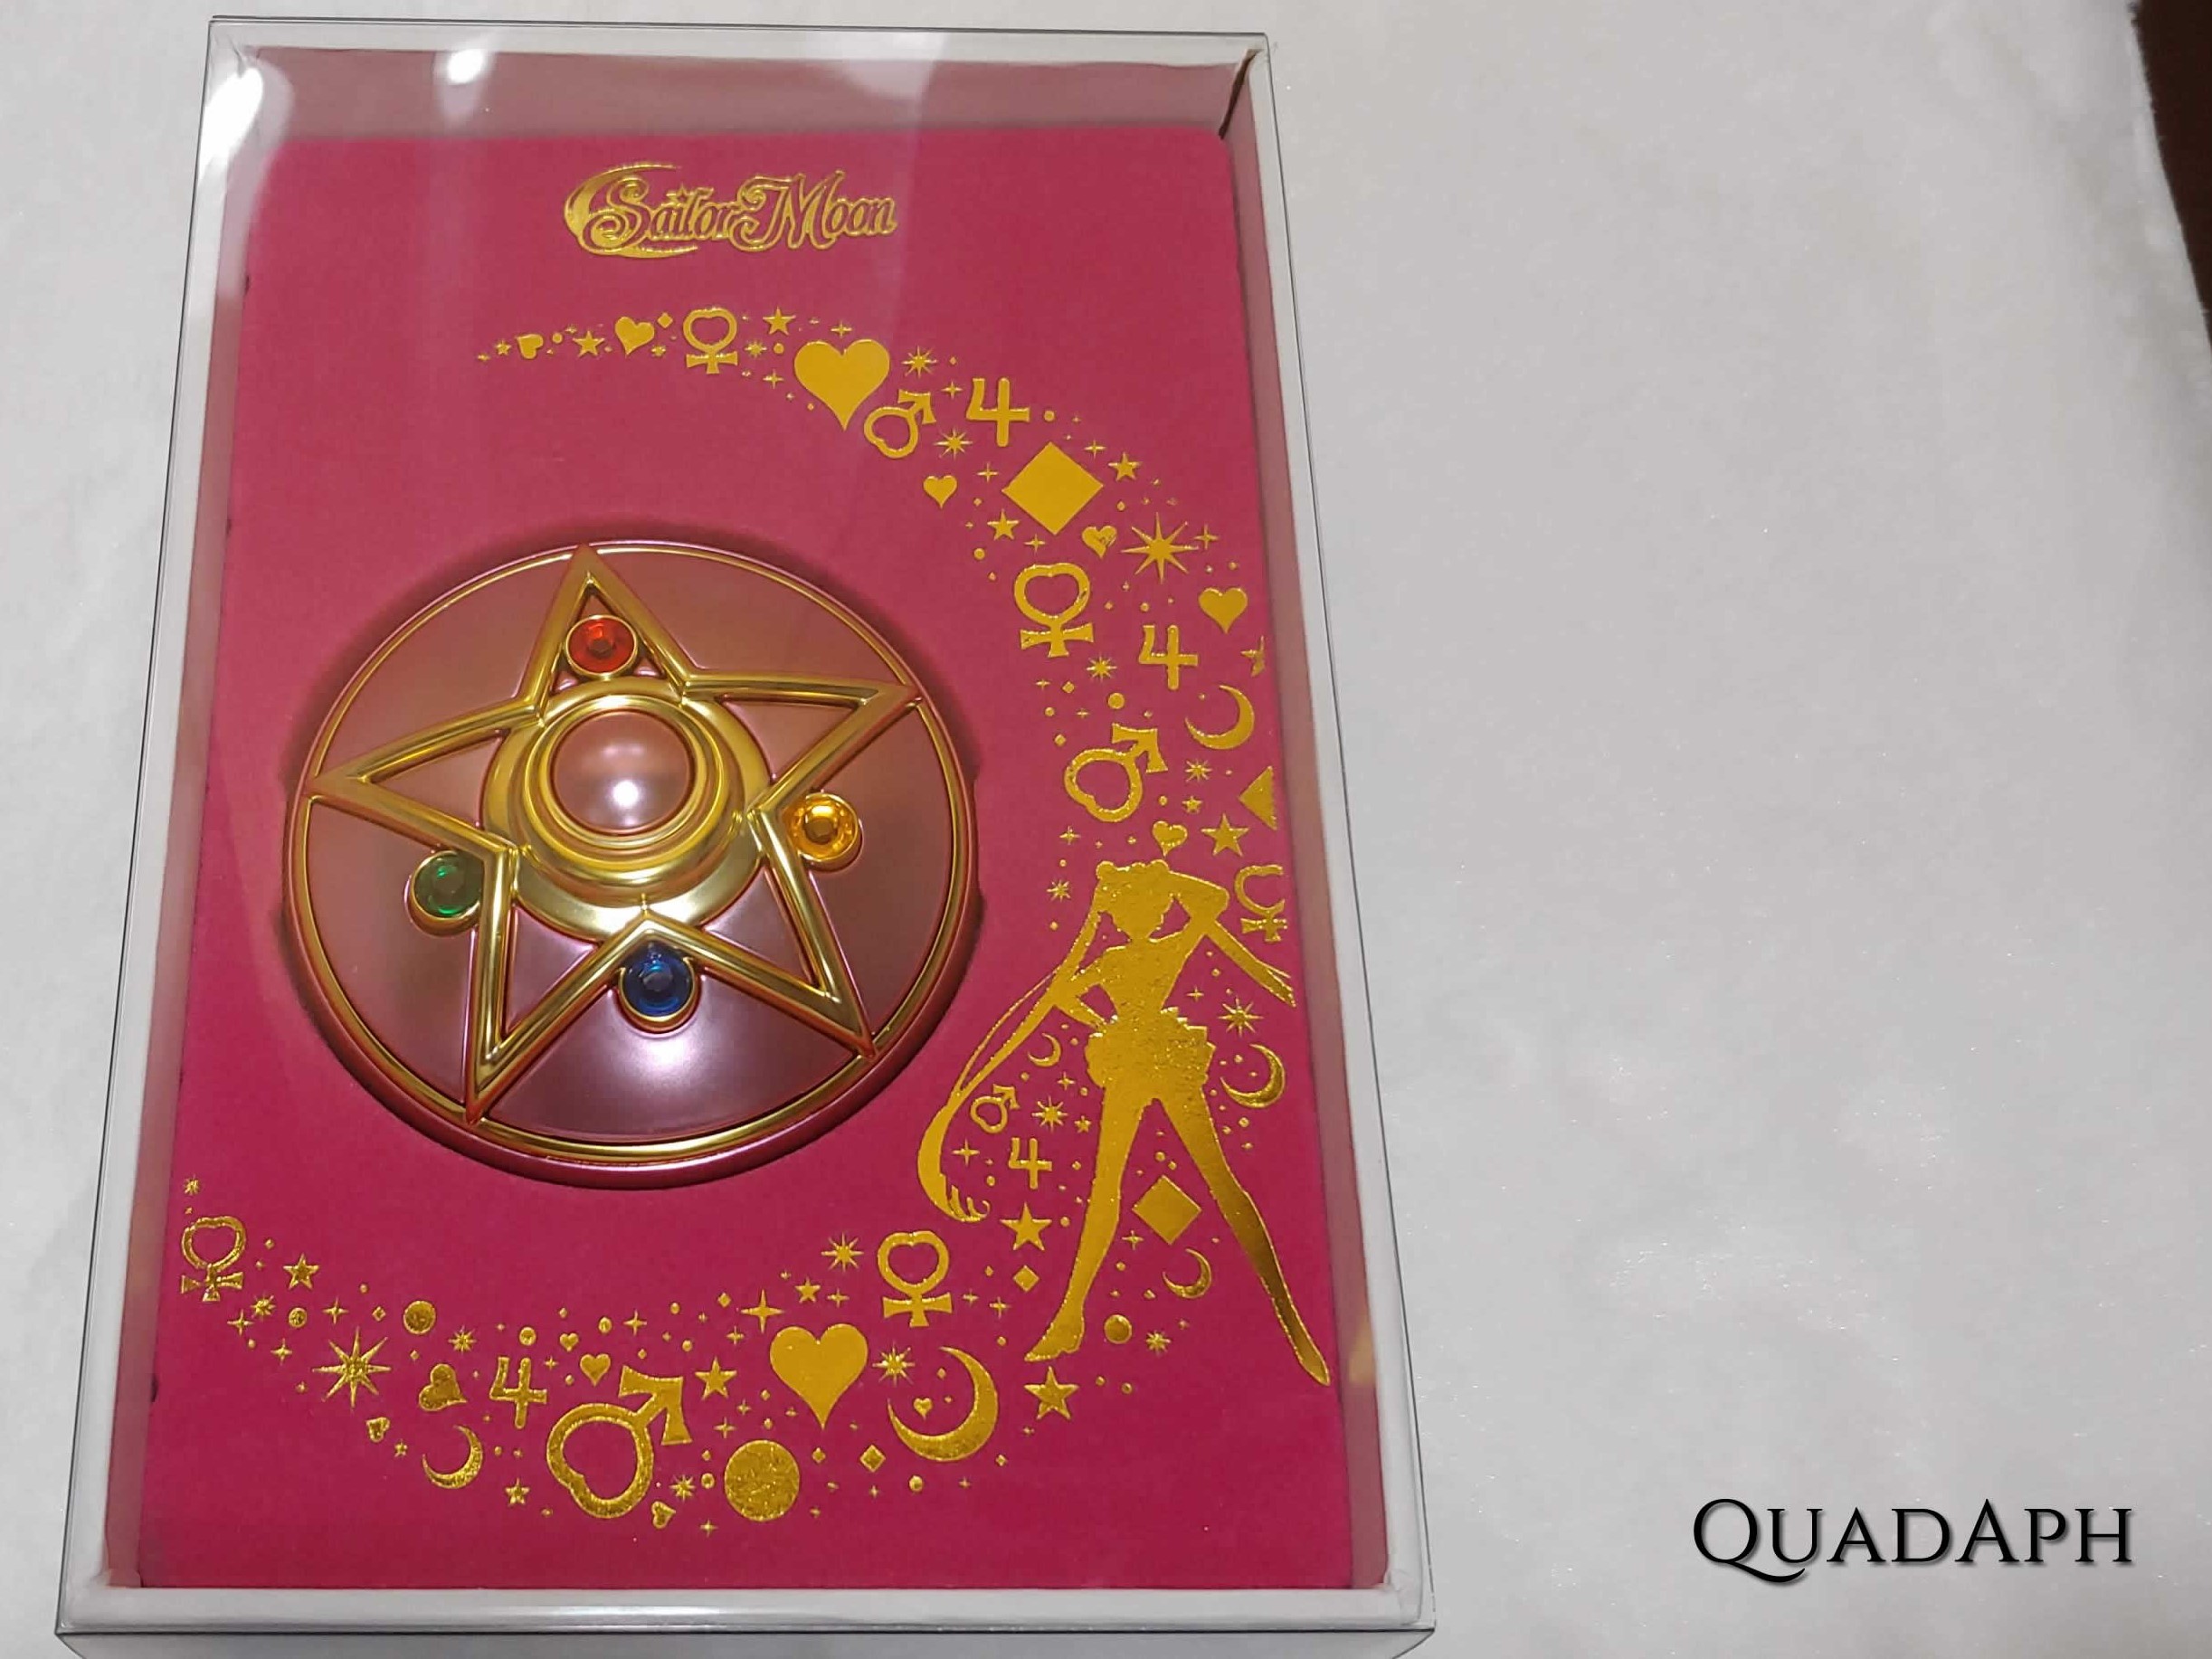 Sailormoon Portable Power Bank licensed by Toei